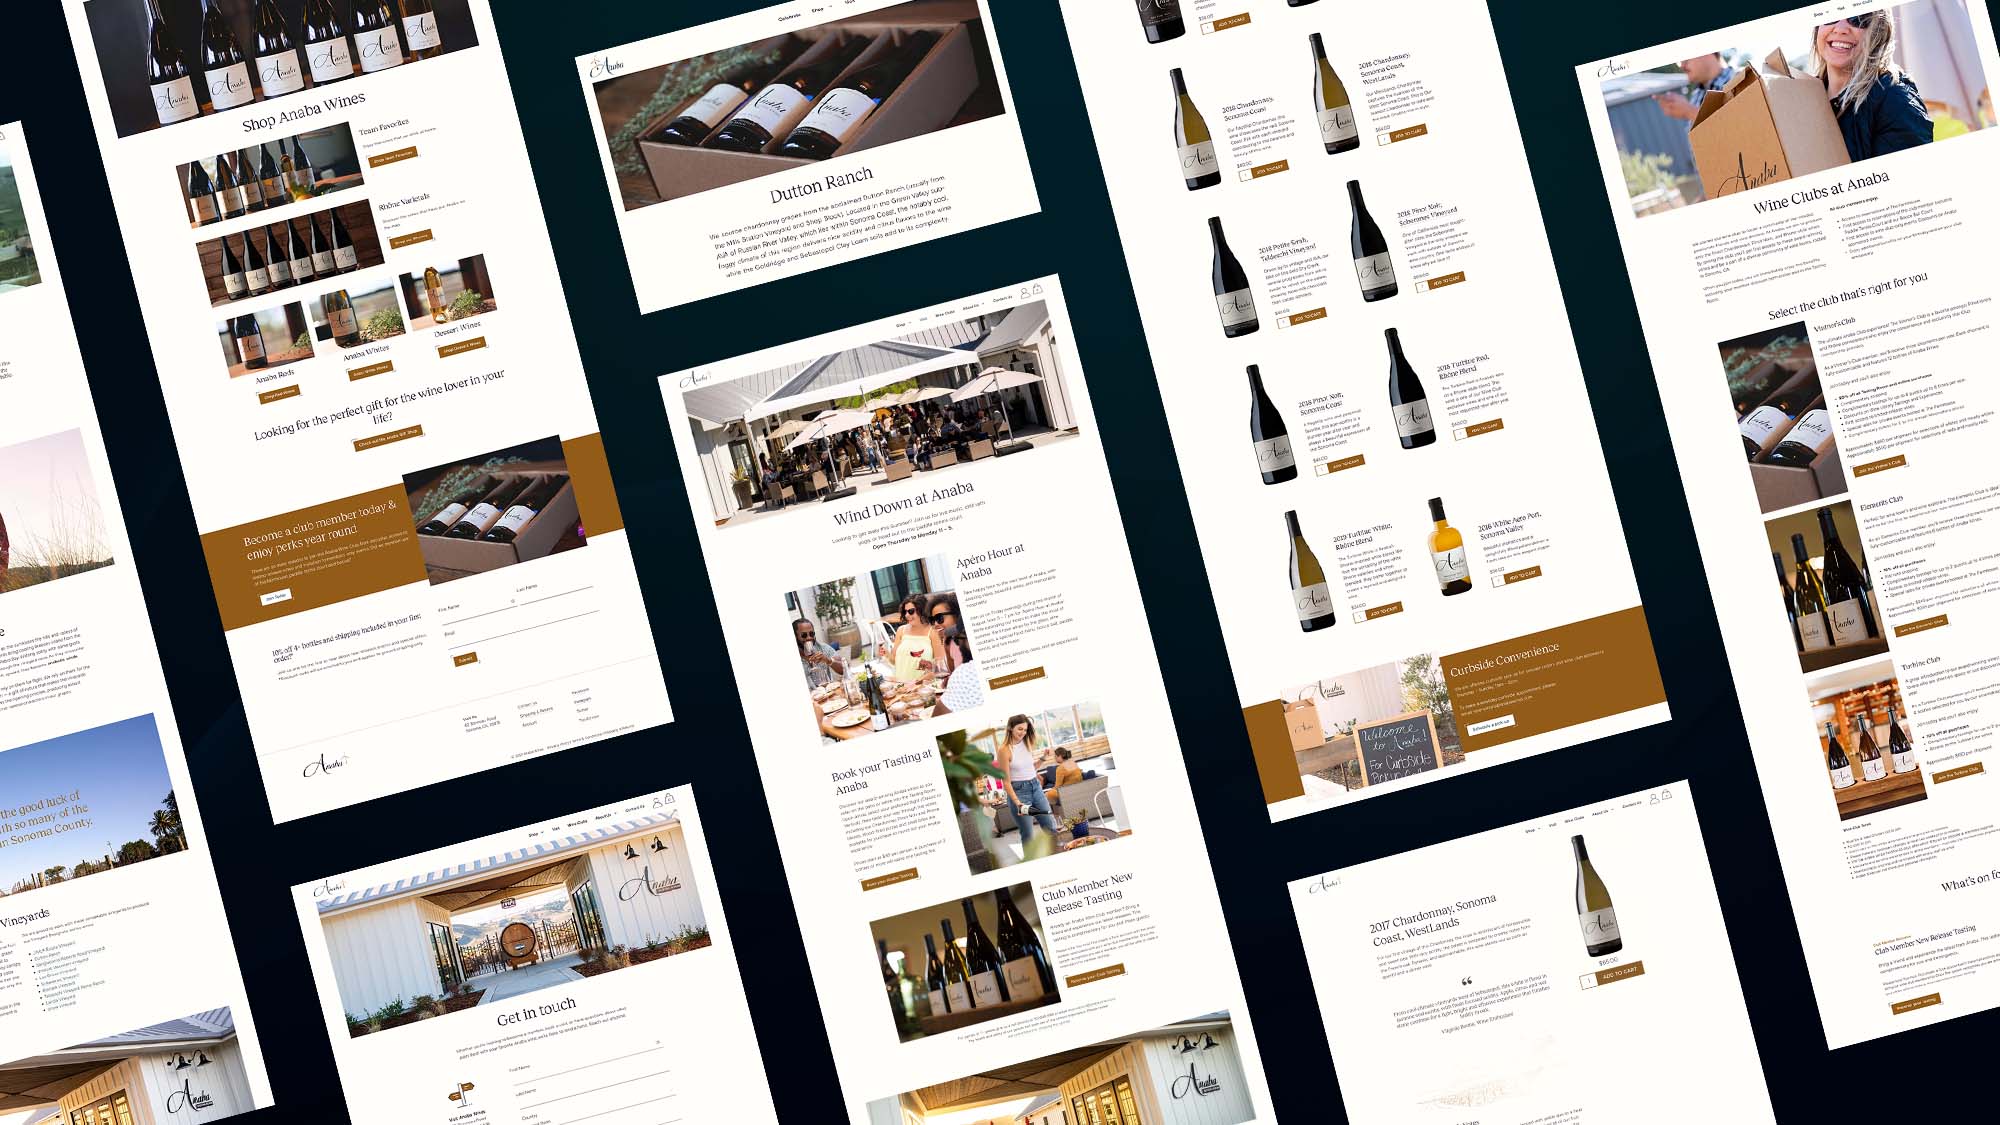 Stylized mockup showing various pages of the Anaba Wines website as designed and built by 5forests